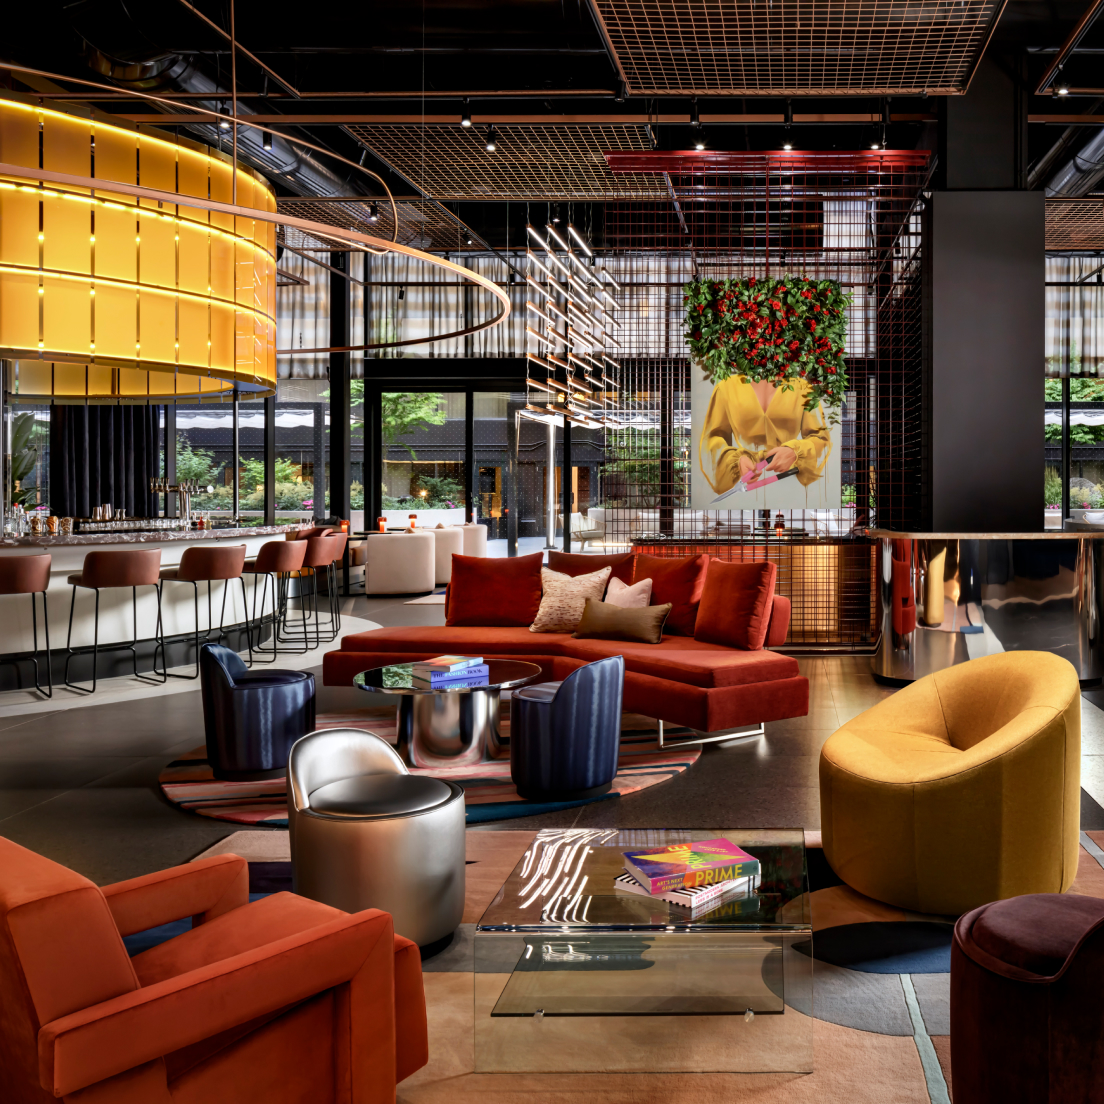 A stylish modern lounge with a bar area, featuring vibrant orange and blue seating, metallic accents, and a large flower arrangement hanging above a relaxed seating area.